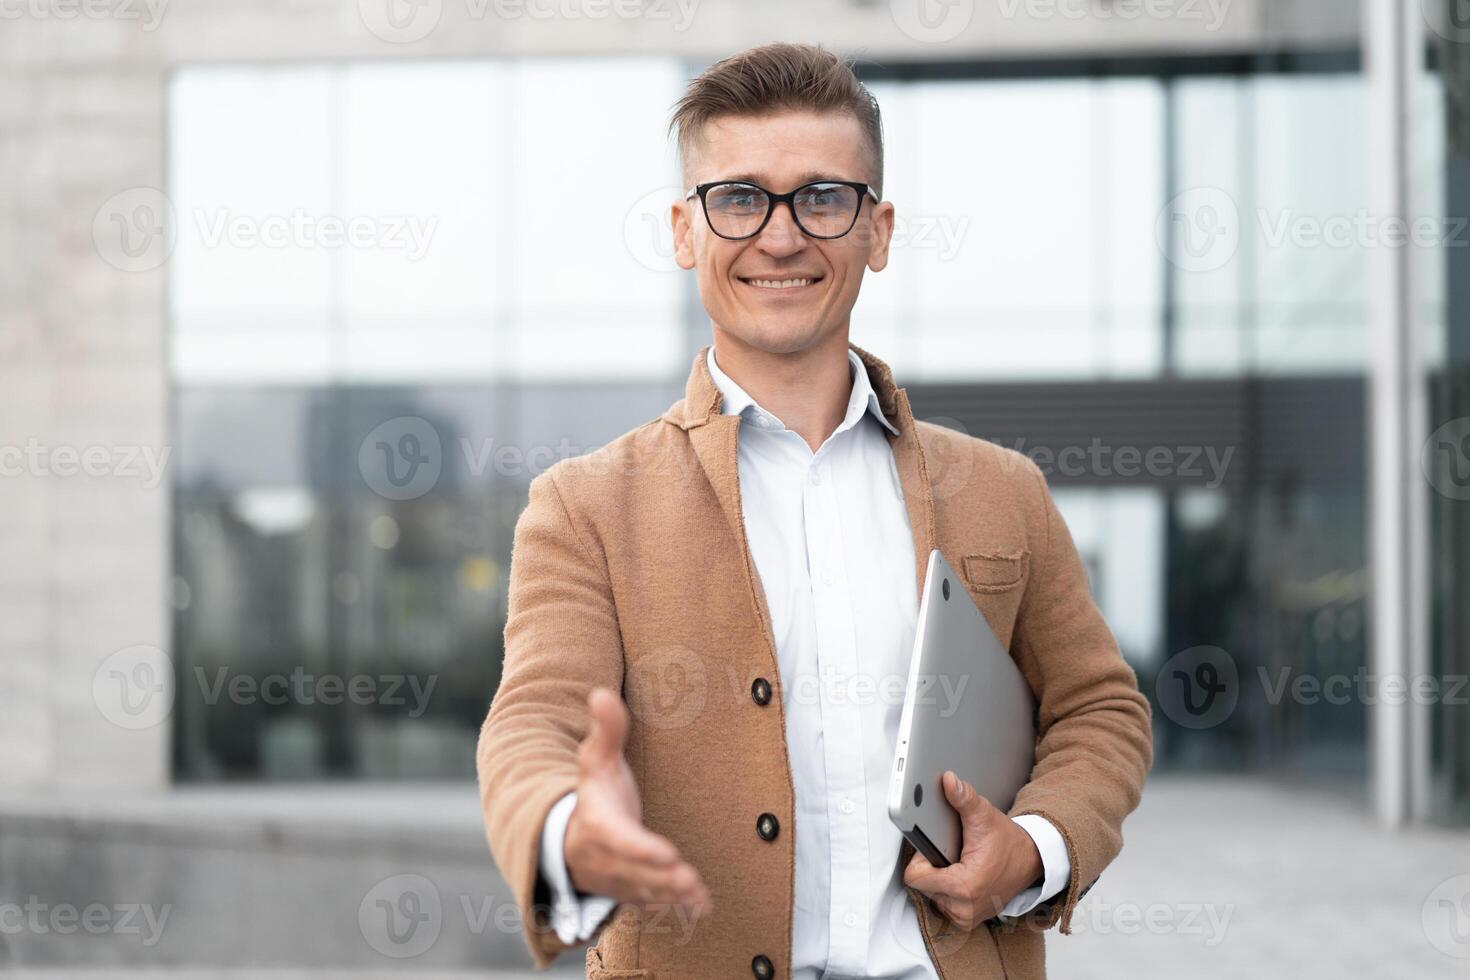 Business. Businessman Giving Hand For Handshake Welcome Gesture photo